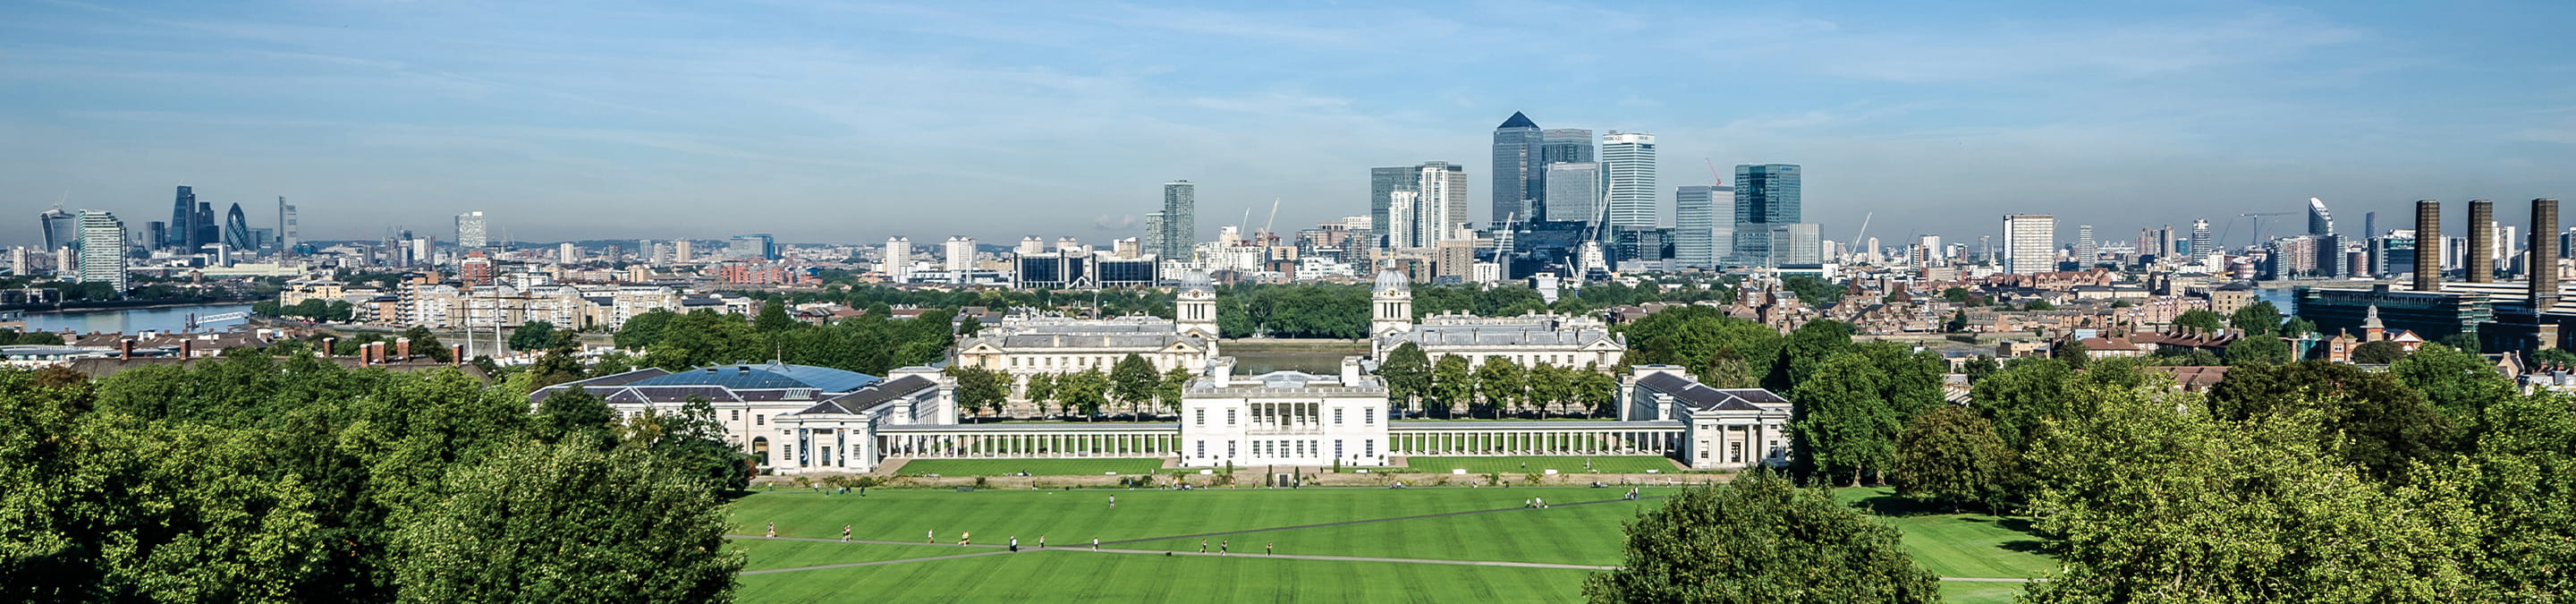 National Maritime Museum in Greenwich with London skyline in the background